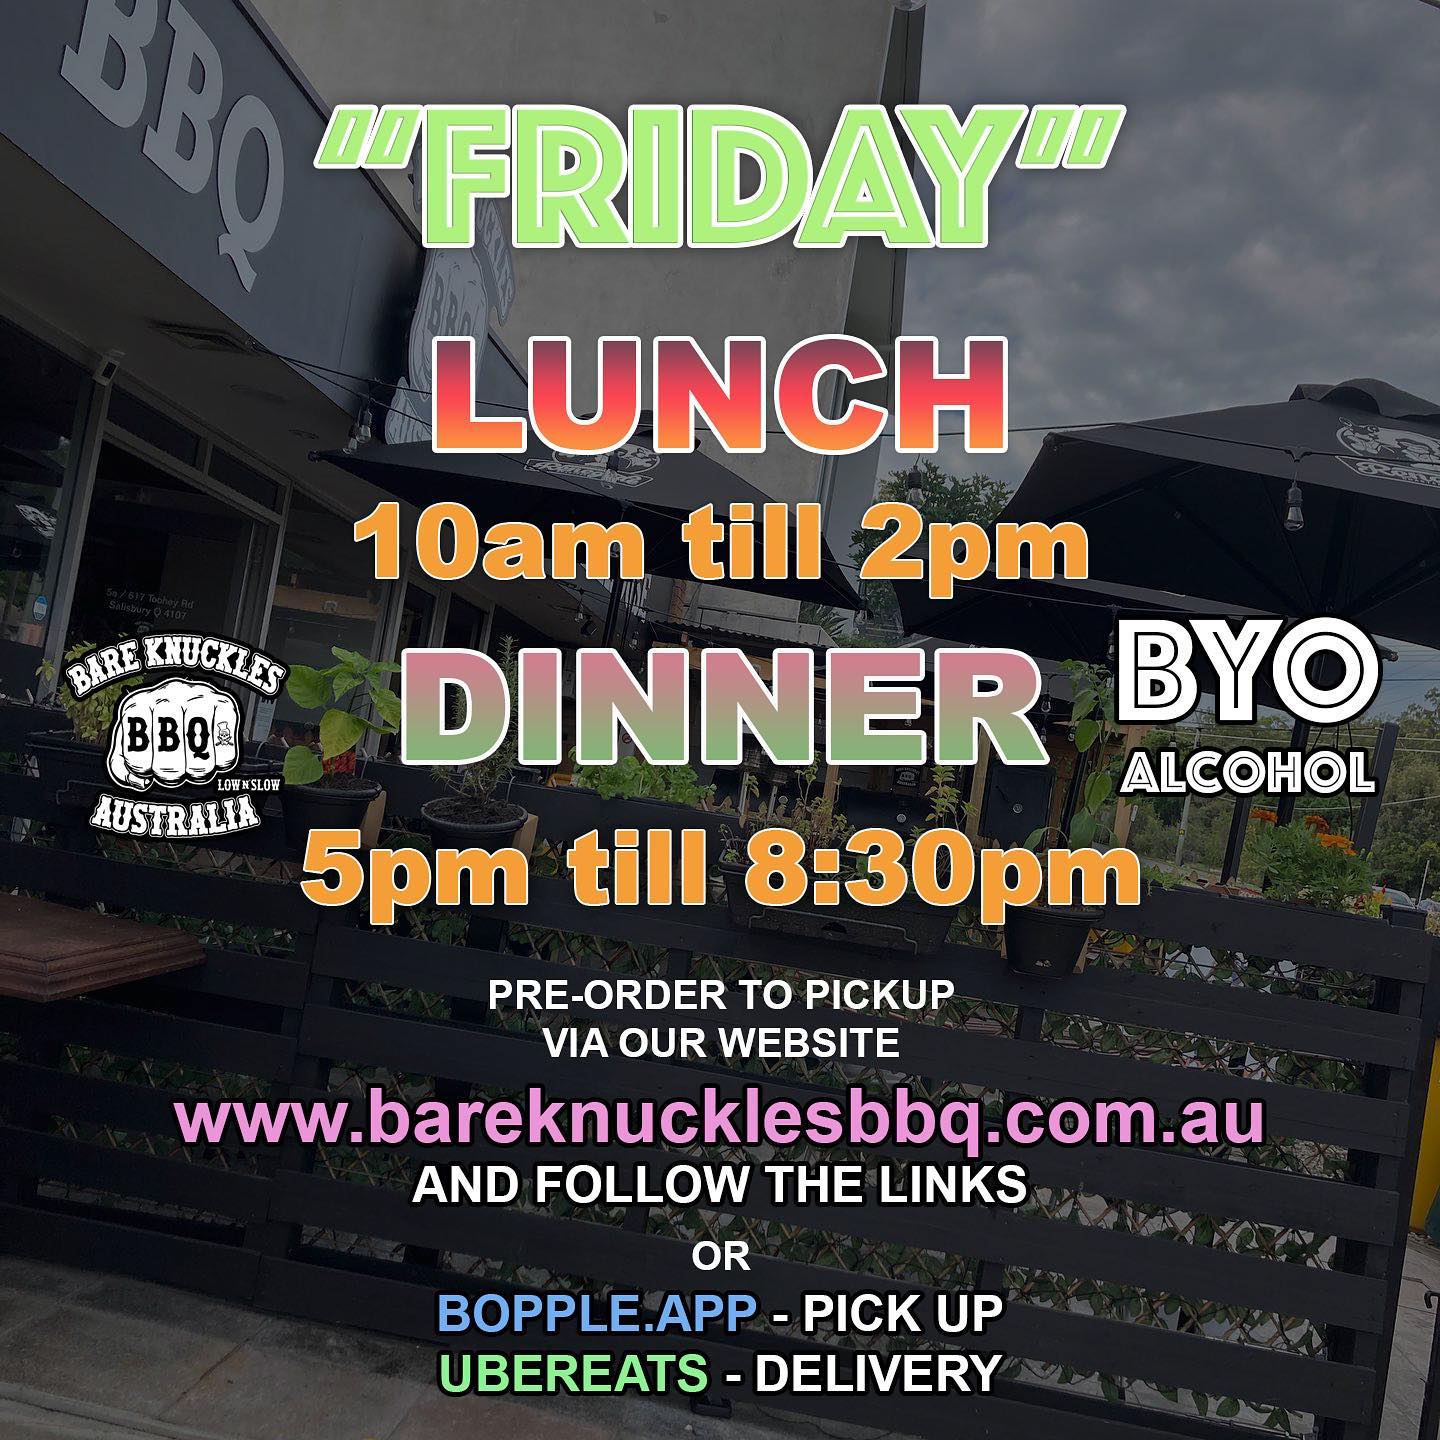 End of the working week for most - come have lunch and a few beers.. or Dinner and a few more !! 617 Toohey Rd, Salisbury 🏻